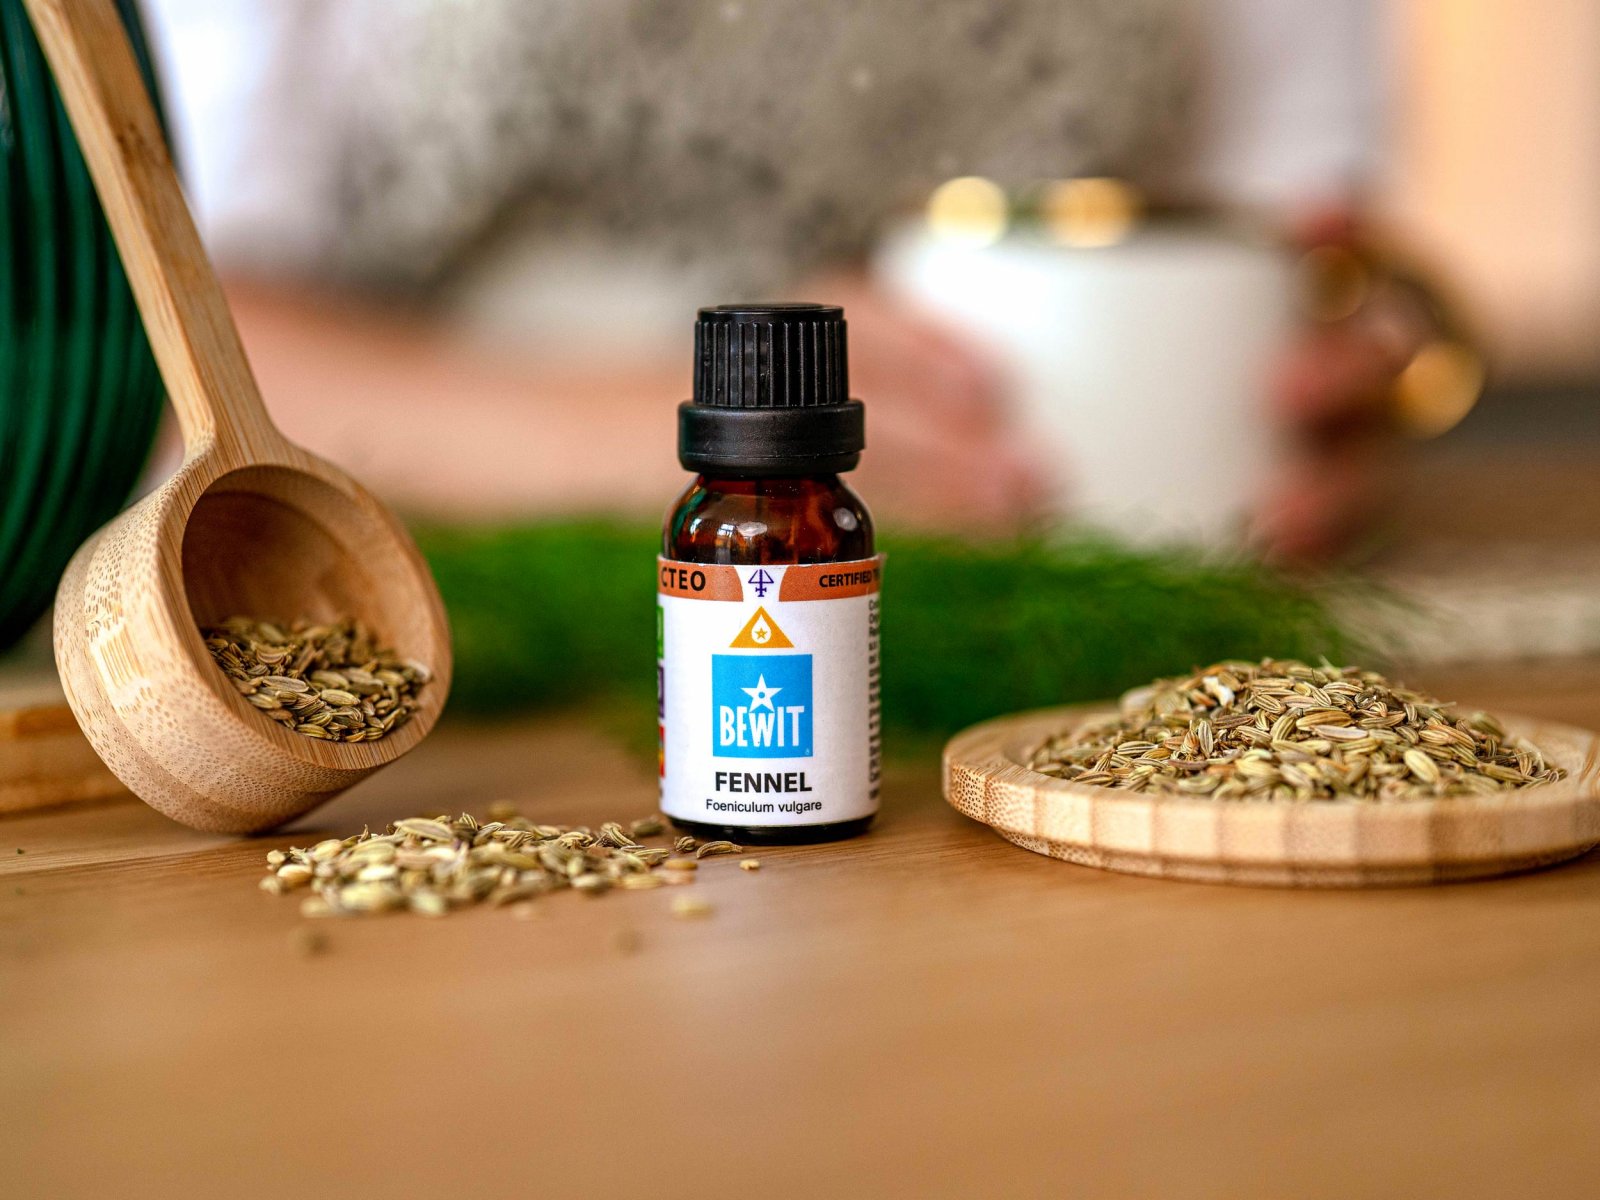 Fennel - This is a 100% pure essential oil - 5